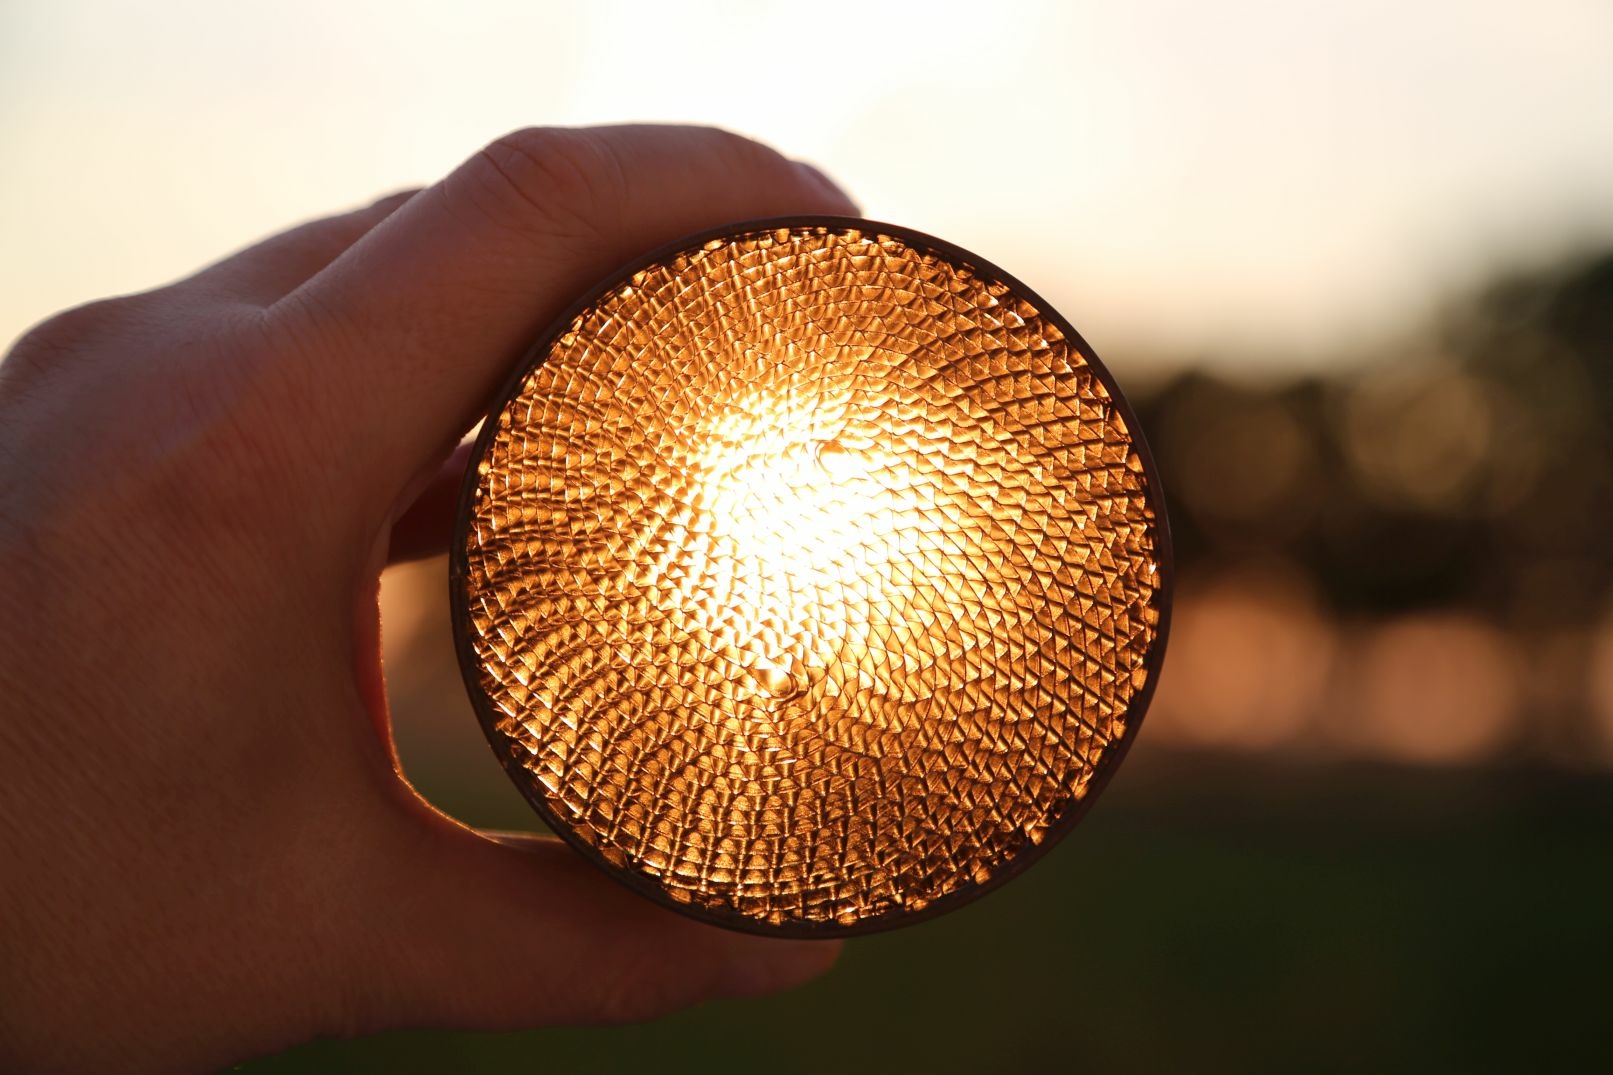 The photo shows a hand holding a honeycomb-shaped, round nickel catalyst into the sun. The honeycomb structure of the metal methanation reaction becomes thus very clear.